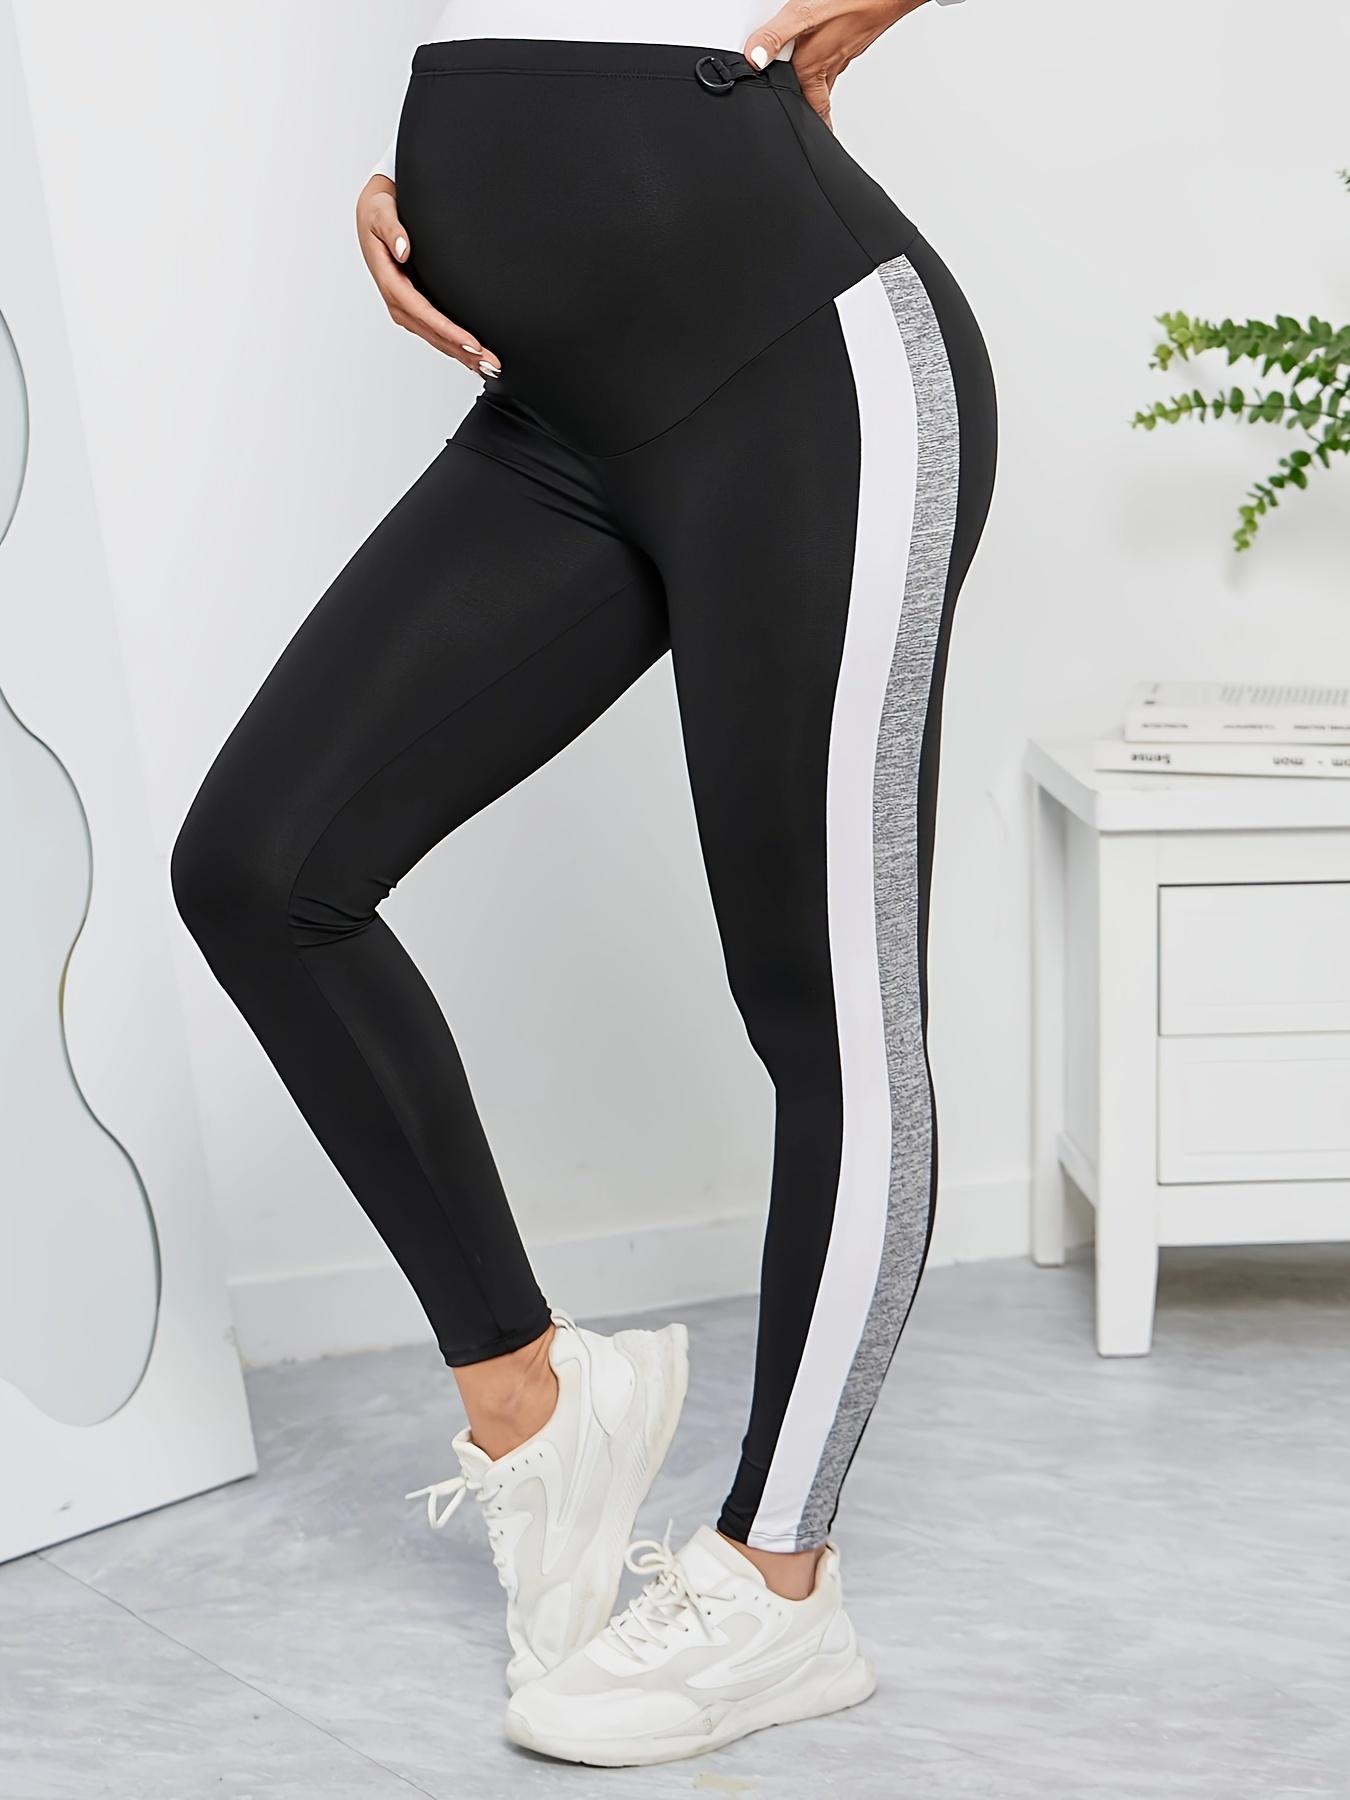  Enerful Womens Maternity Workout Leggings Over The